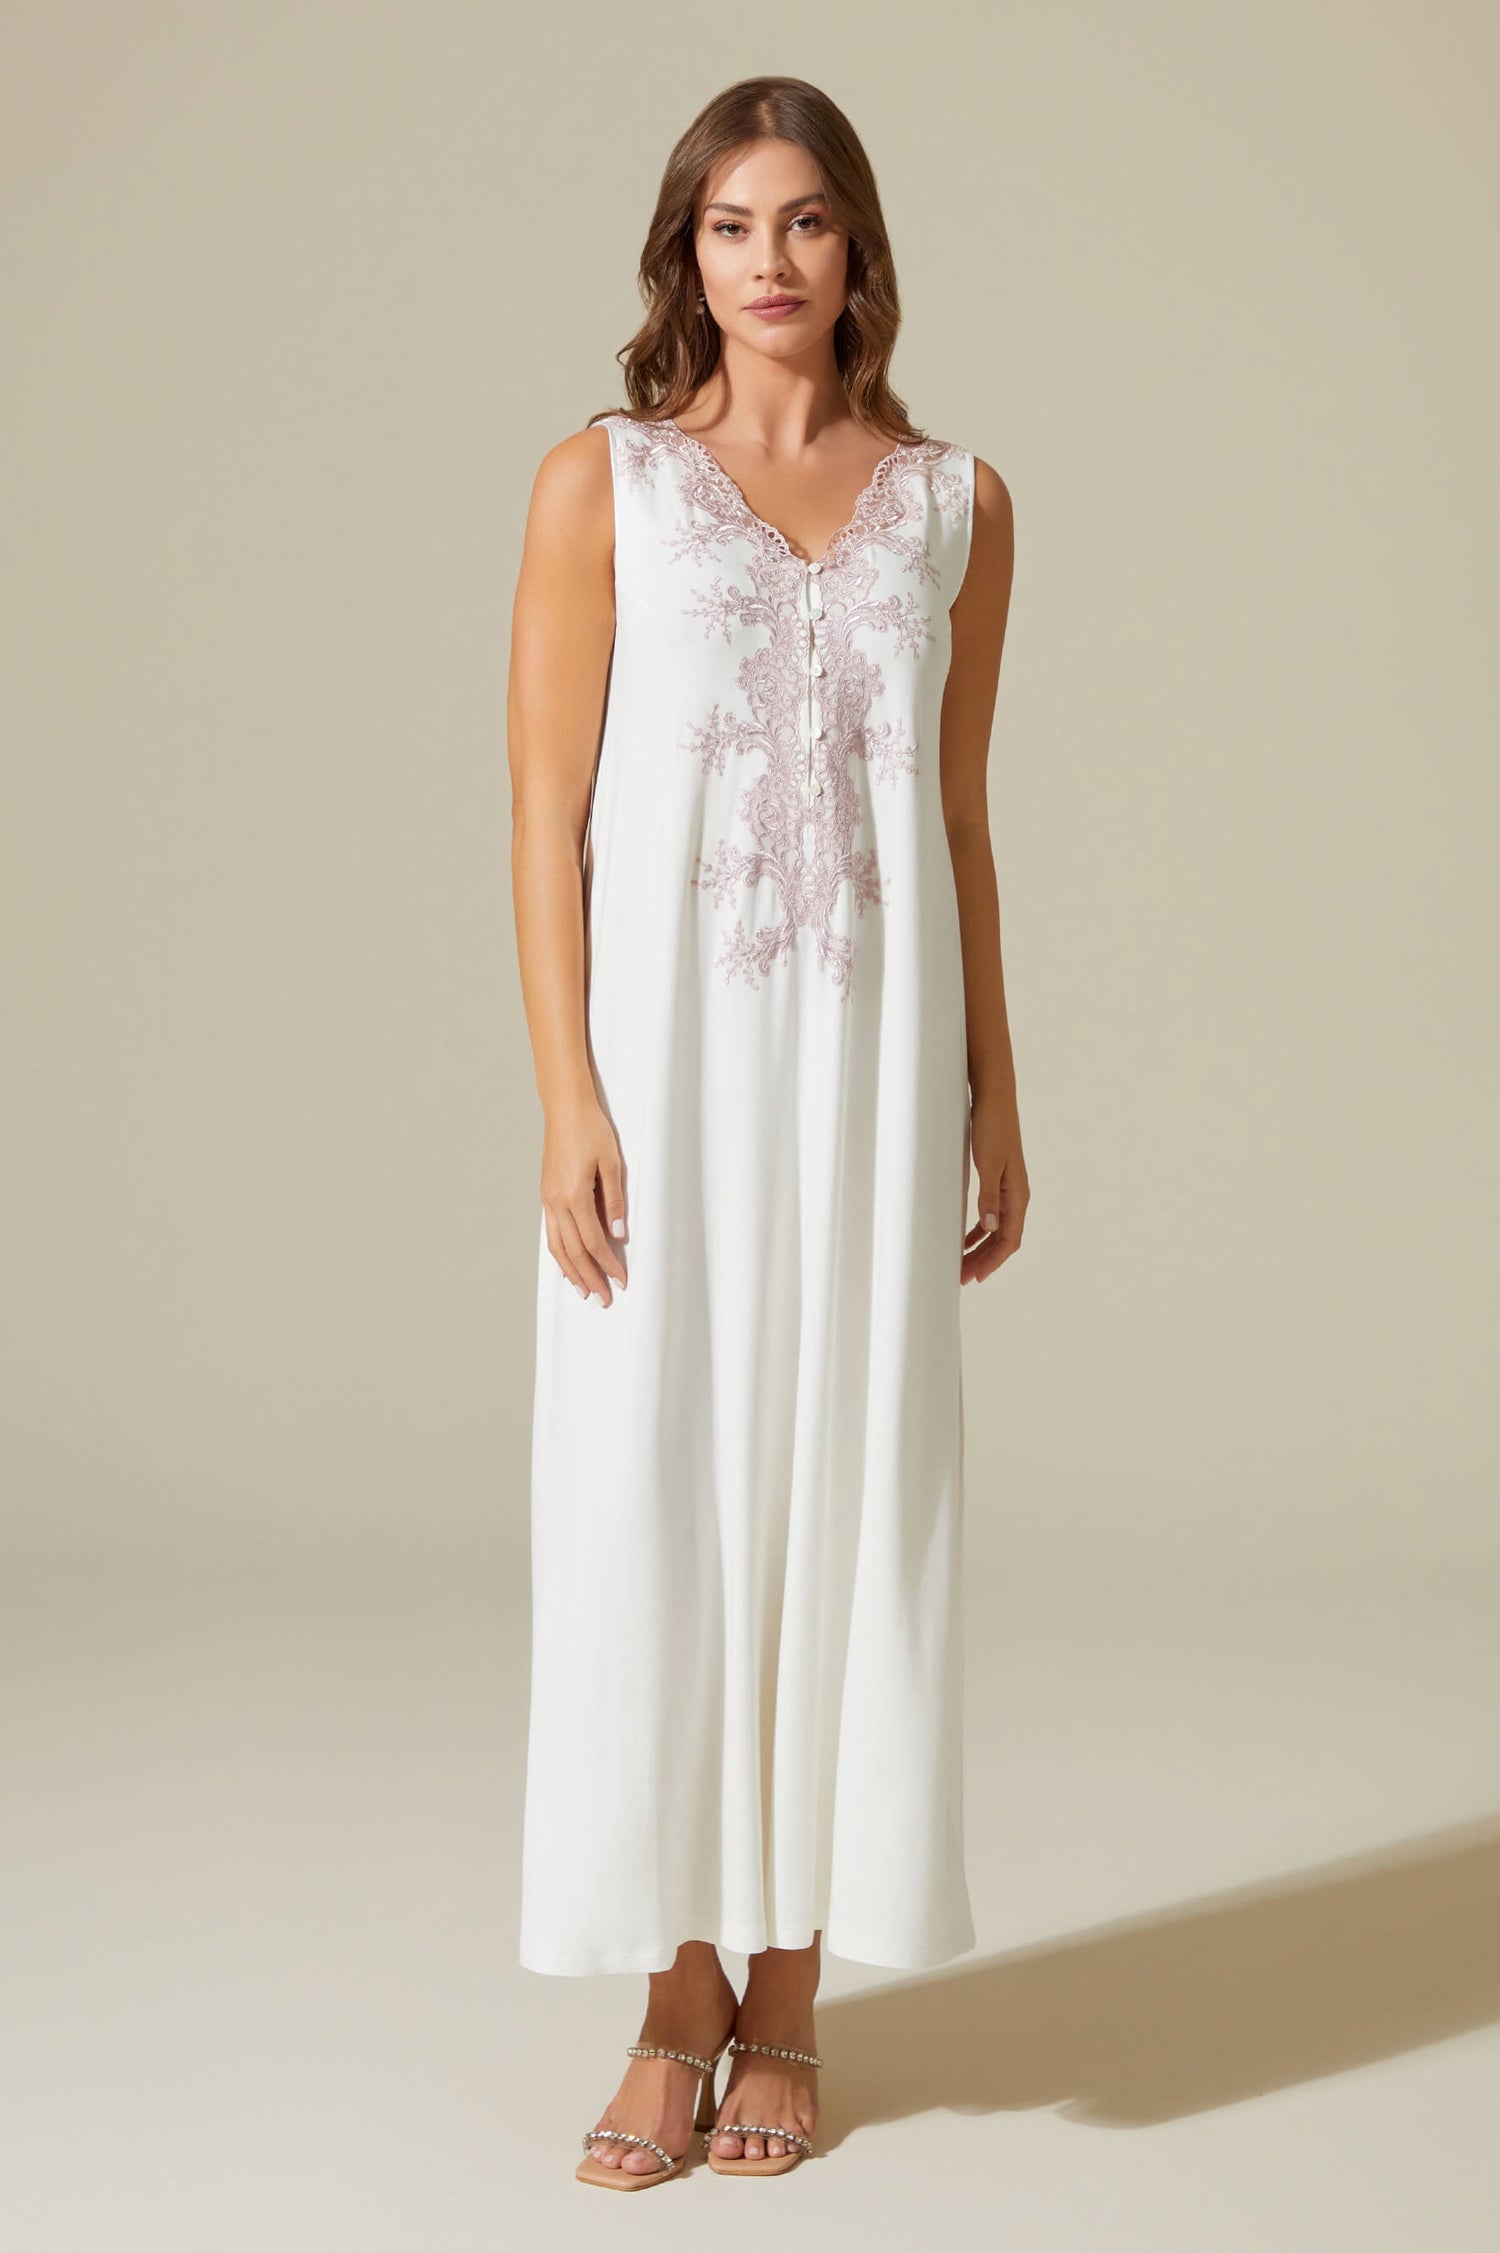 Luna Long Trimmed and Buttoned Cotton Nightgown - Powder on Off White